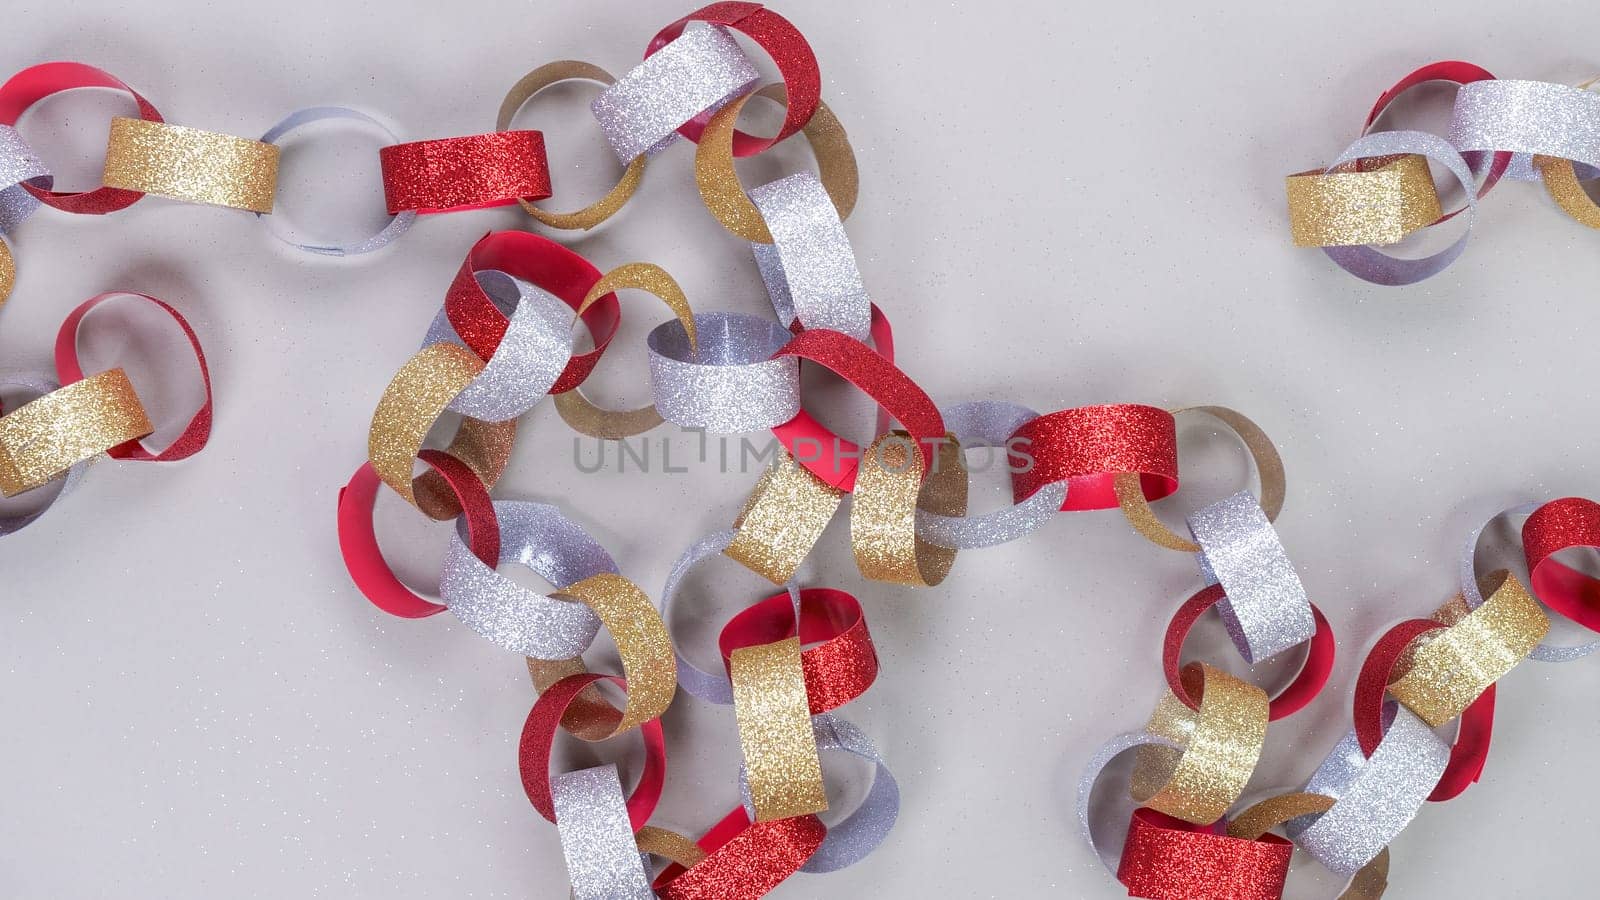 Colorful background with strips of gold silver red sparkling chain garland on grey. Festive Christmas birthday decoration garland.Space for text. by JuliaDorian